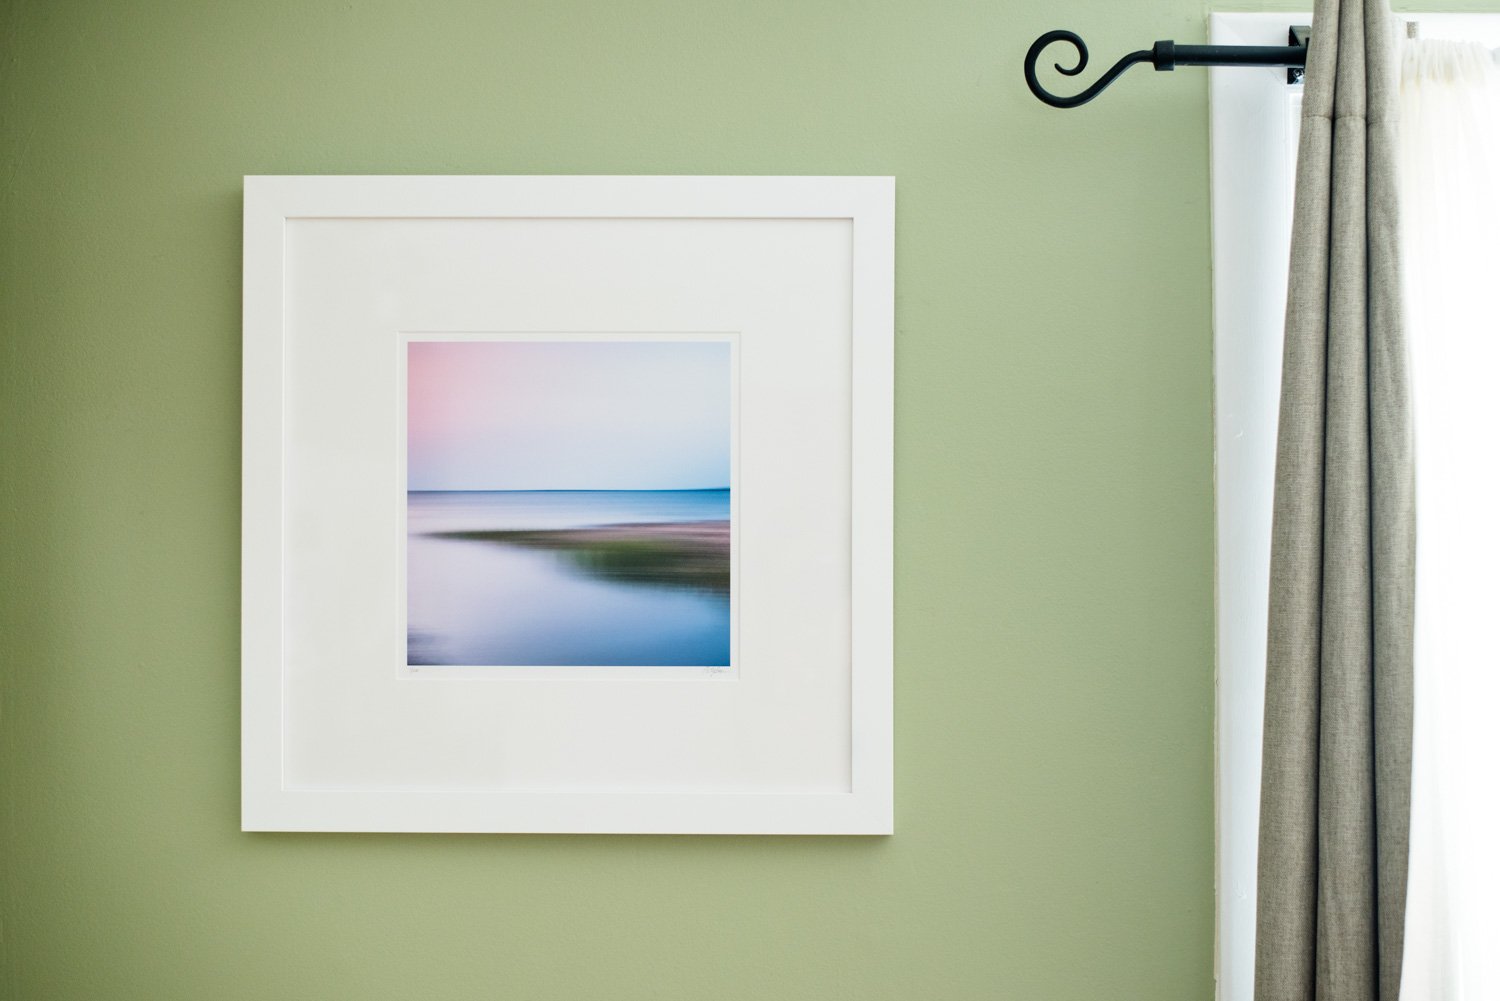 Cate Brown Photo Rome Point Summer Abstract #1 // Framed Fine Art 20x20" // Limited Edition 1 of 100 Available Inventory Ocean Fine Art